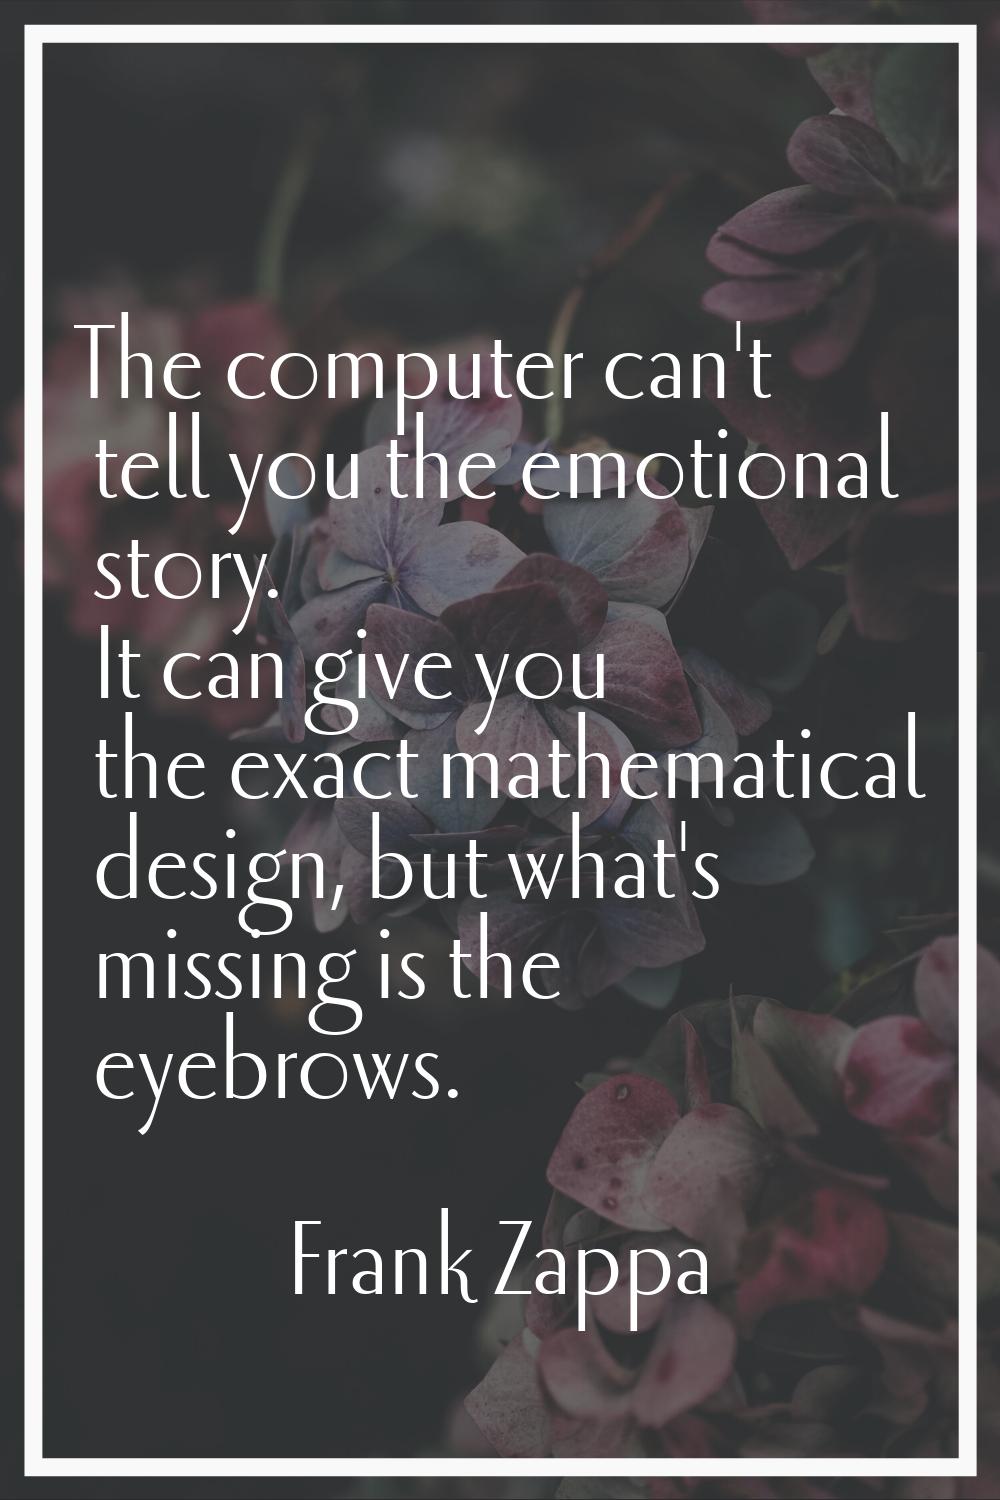 The computer can't tell you the emotional story. It can give you the exact mathematical design, but